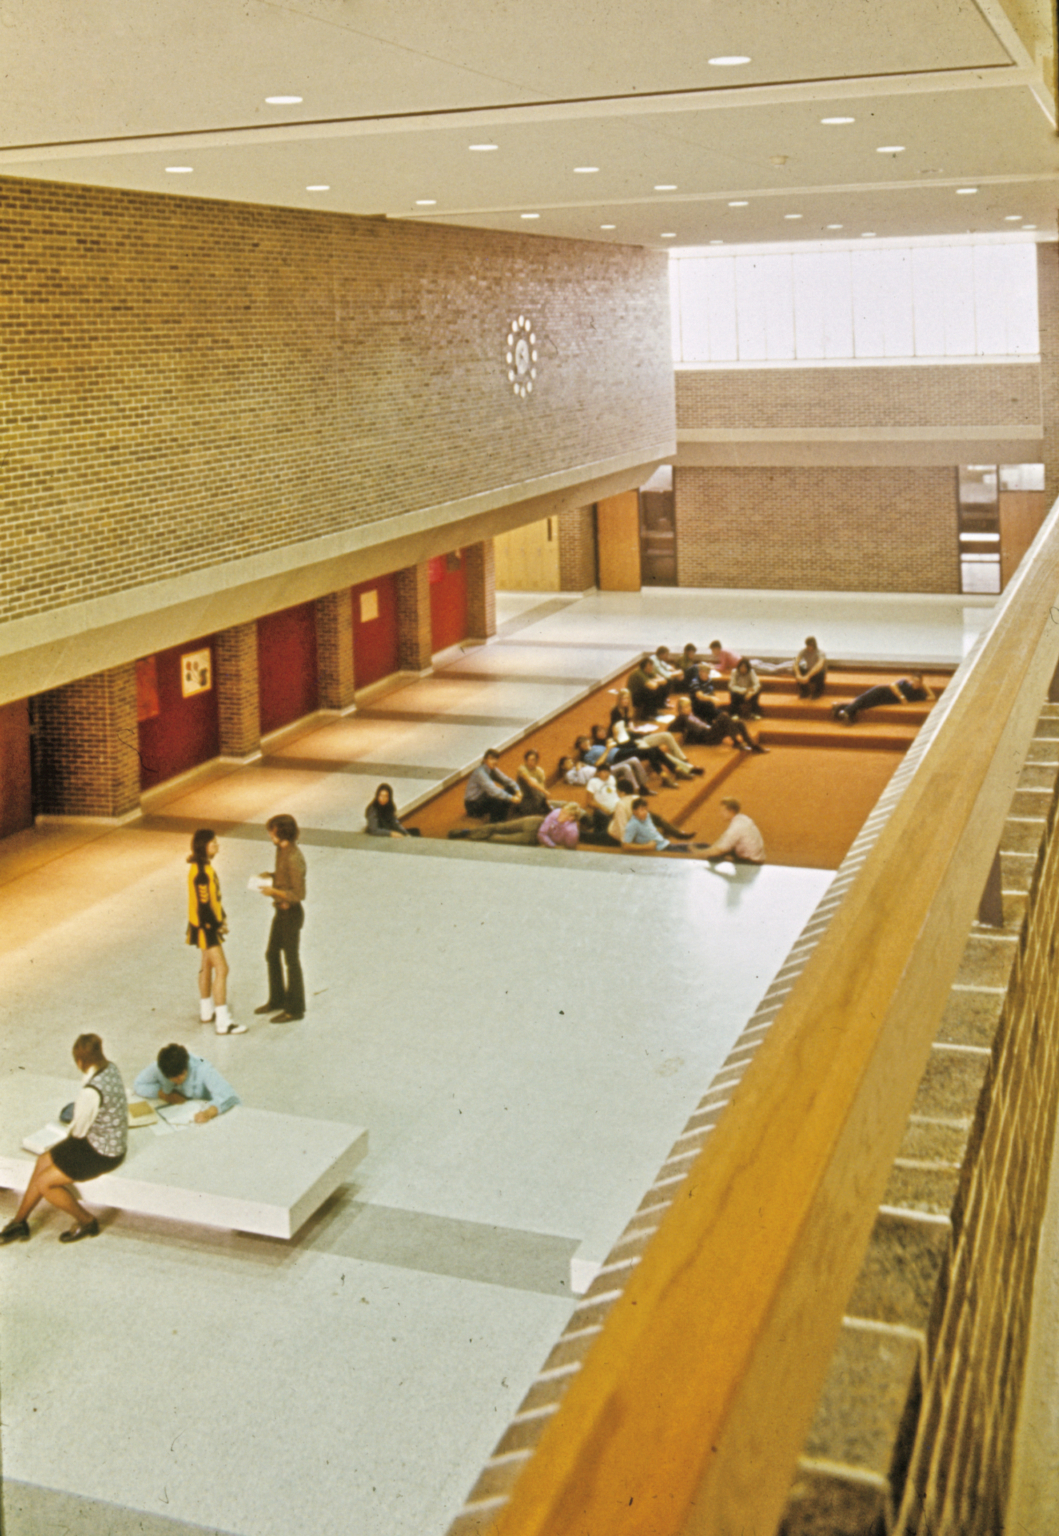 sunken carpet seating at bryan high school in omaha c. 1969 by dlr group